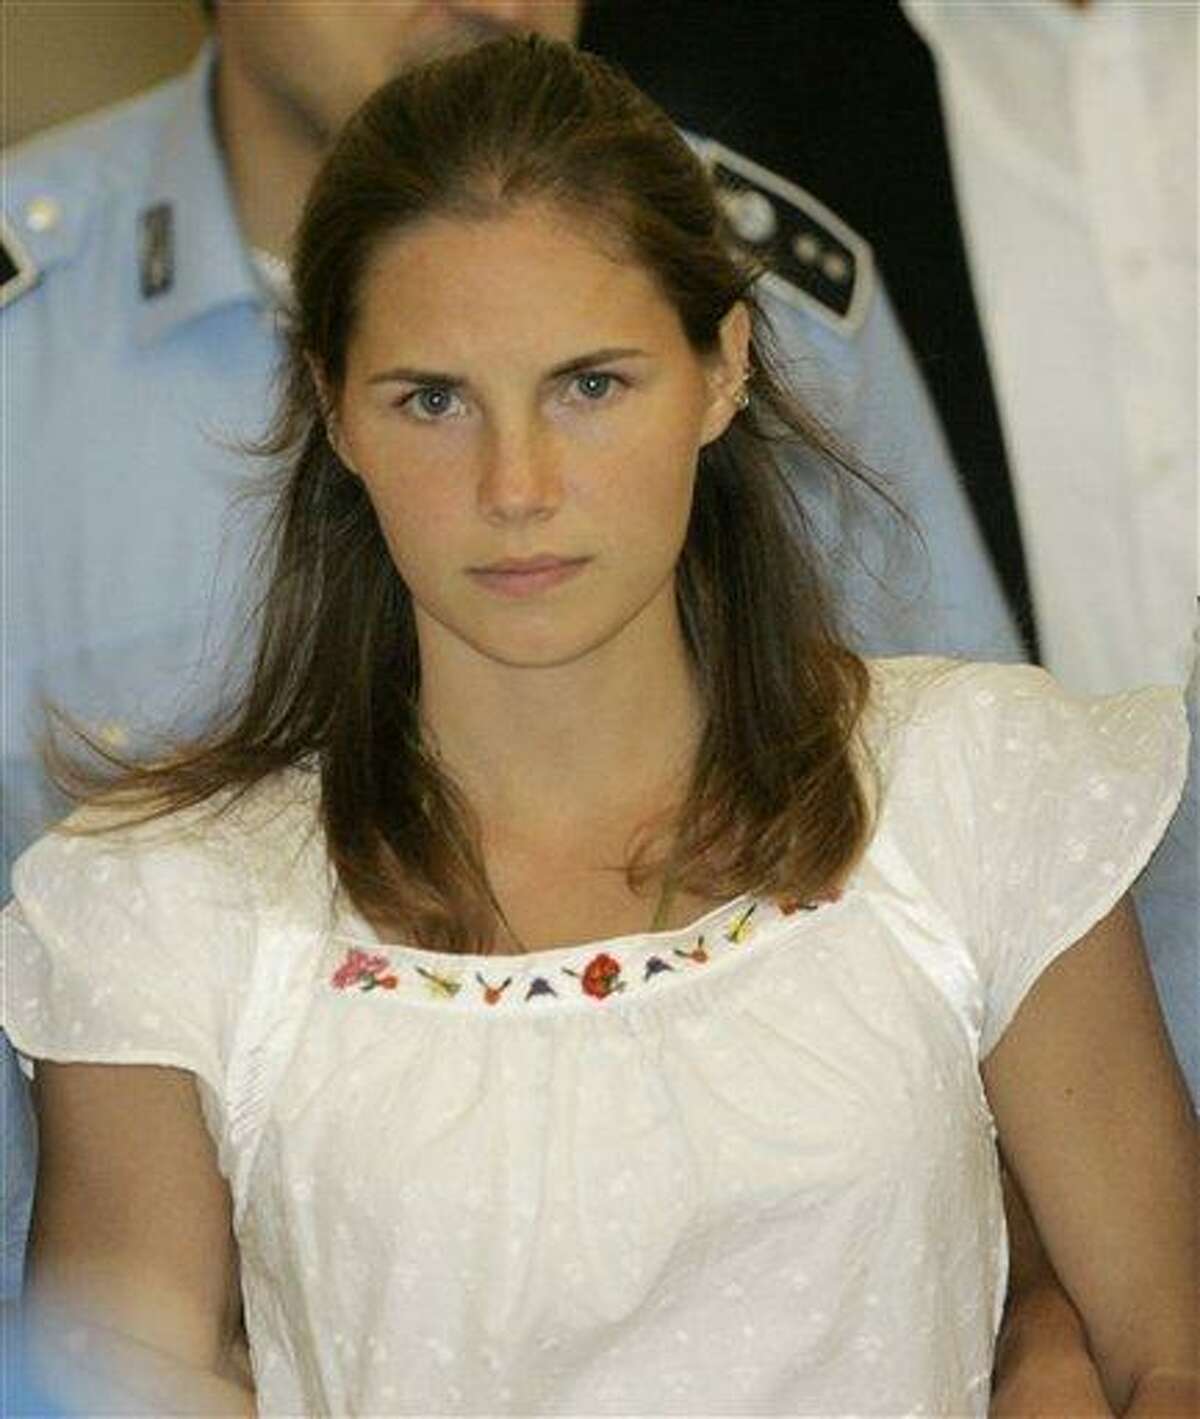 American murder suspect Amanda Knox is escorted by Italian penitentiary police officers from Perugia's court after a hearing in 2008. Italian prosecutors have appealed to Italy's highest criminal court a decision throwing out the murder conviction against Amanda Knox and her former Italian boyfriend in the brutal slaying of a British student. Associated Press file photo